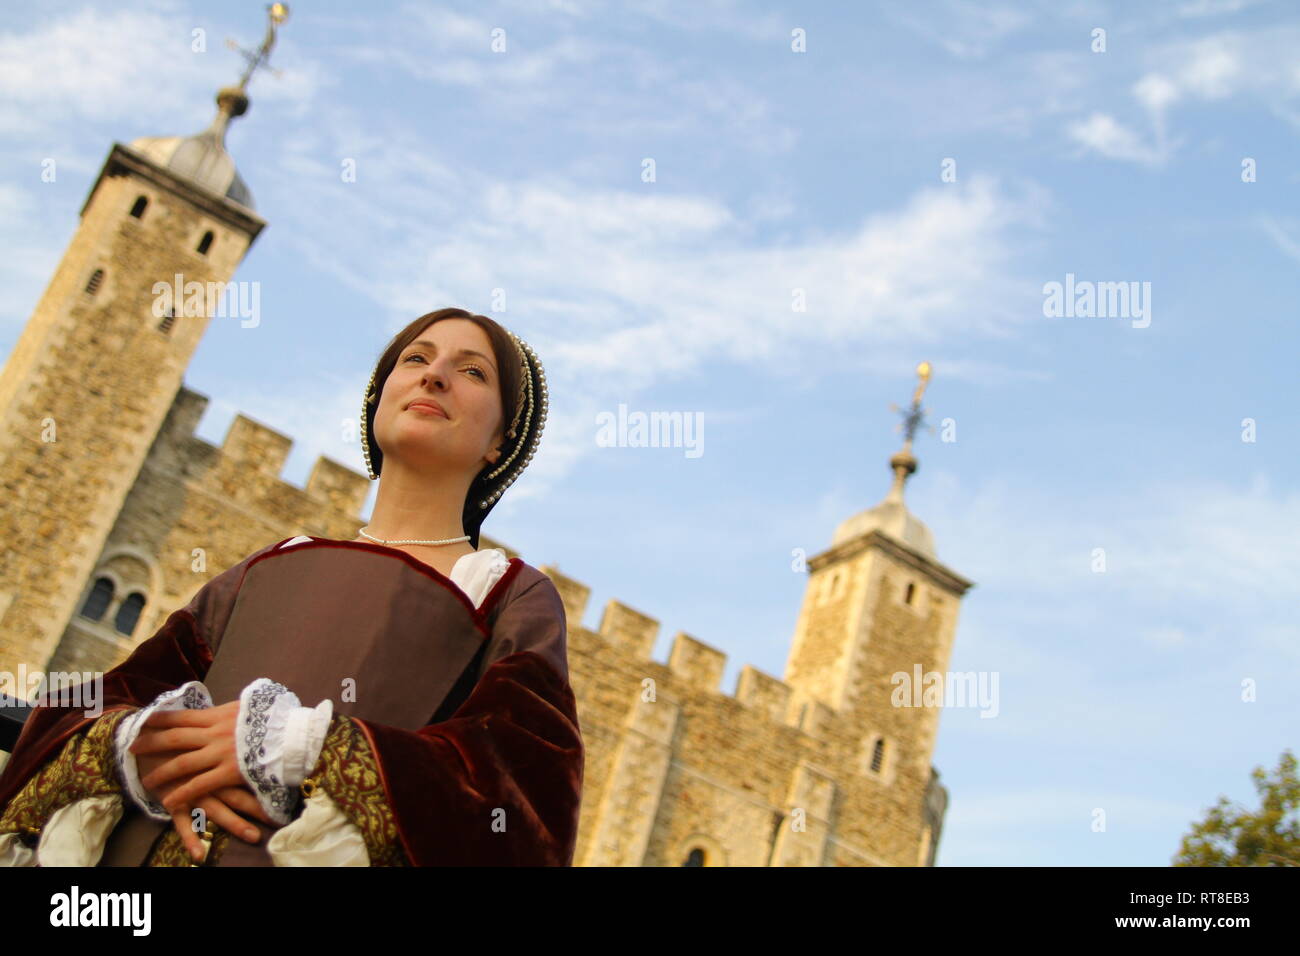 A woman dressed as Anne Boleyn stands in front of the Tower of London- she is a beautiful modern day woman in authentic dress Stock Photo